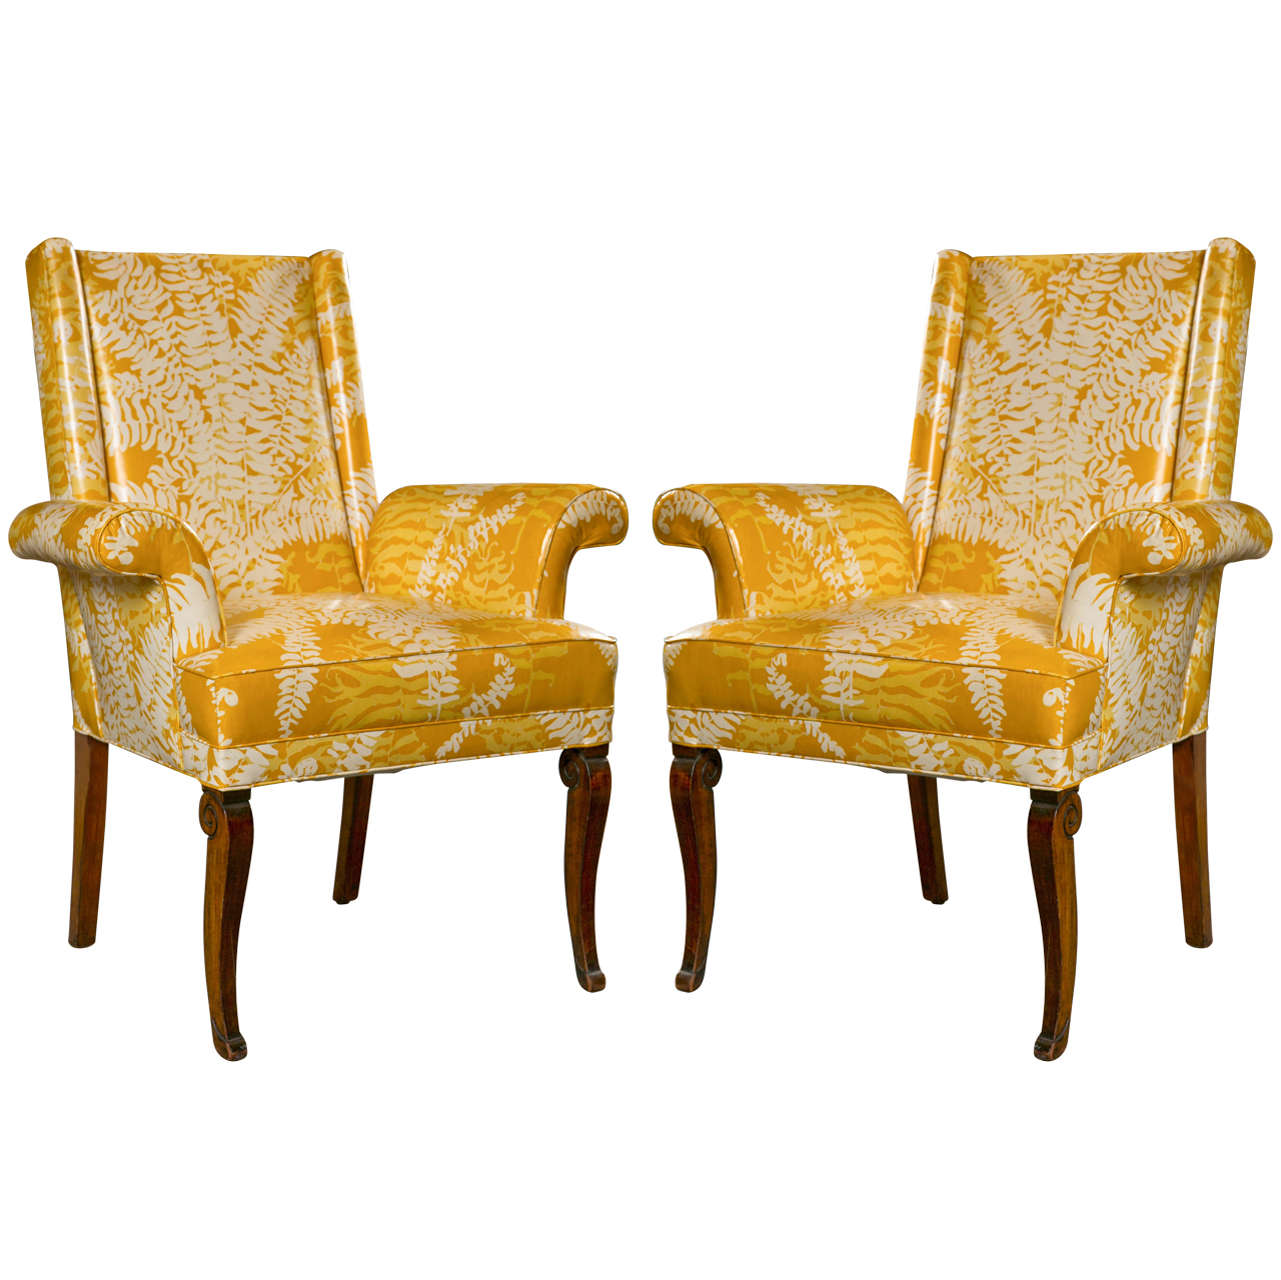 Pair of mid-century wing chairs, c. 1950-60